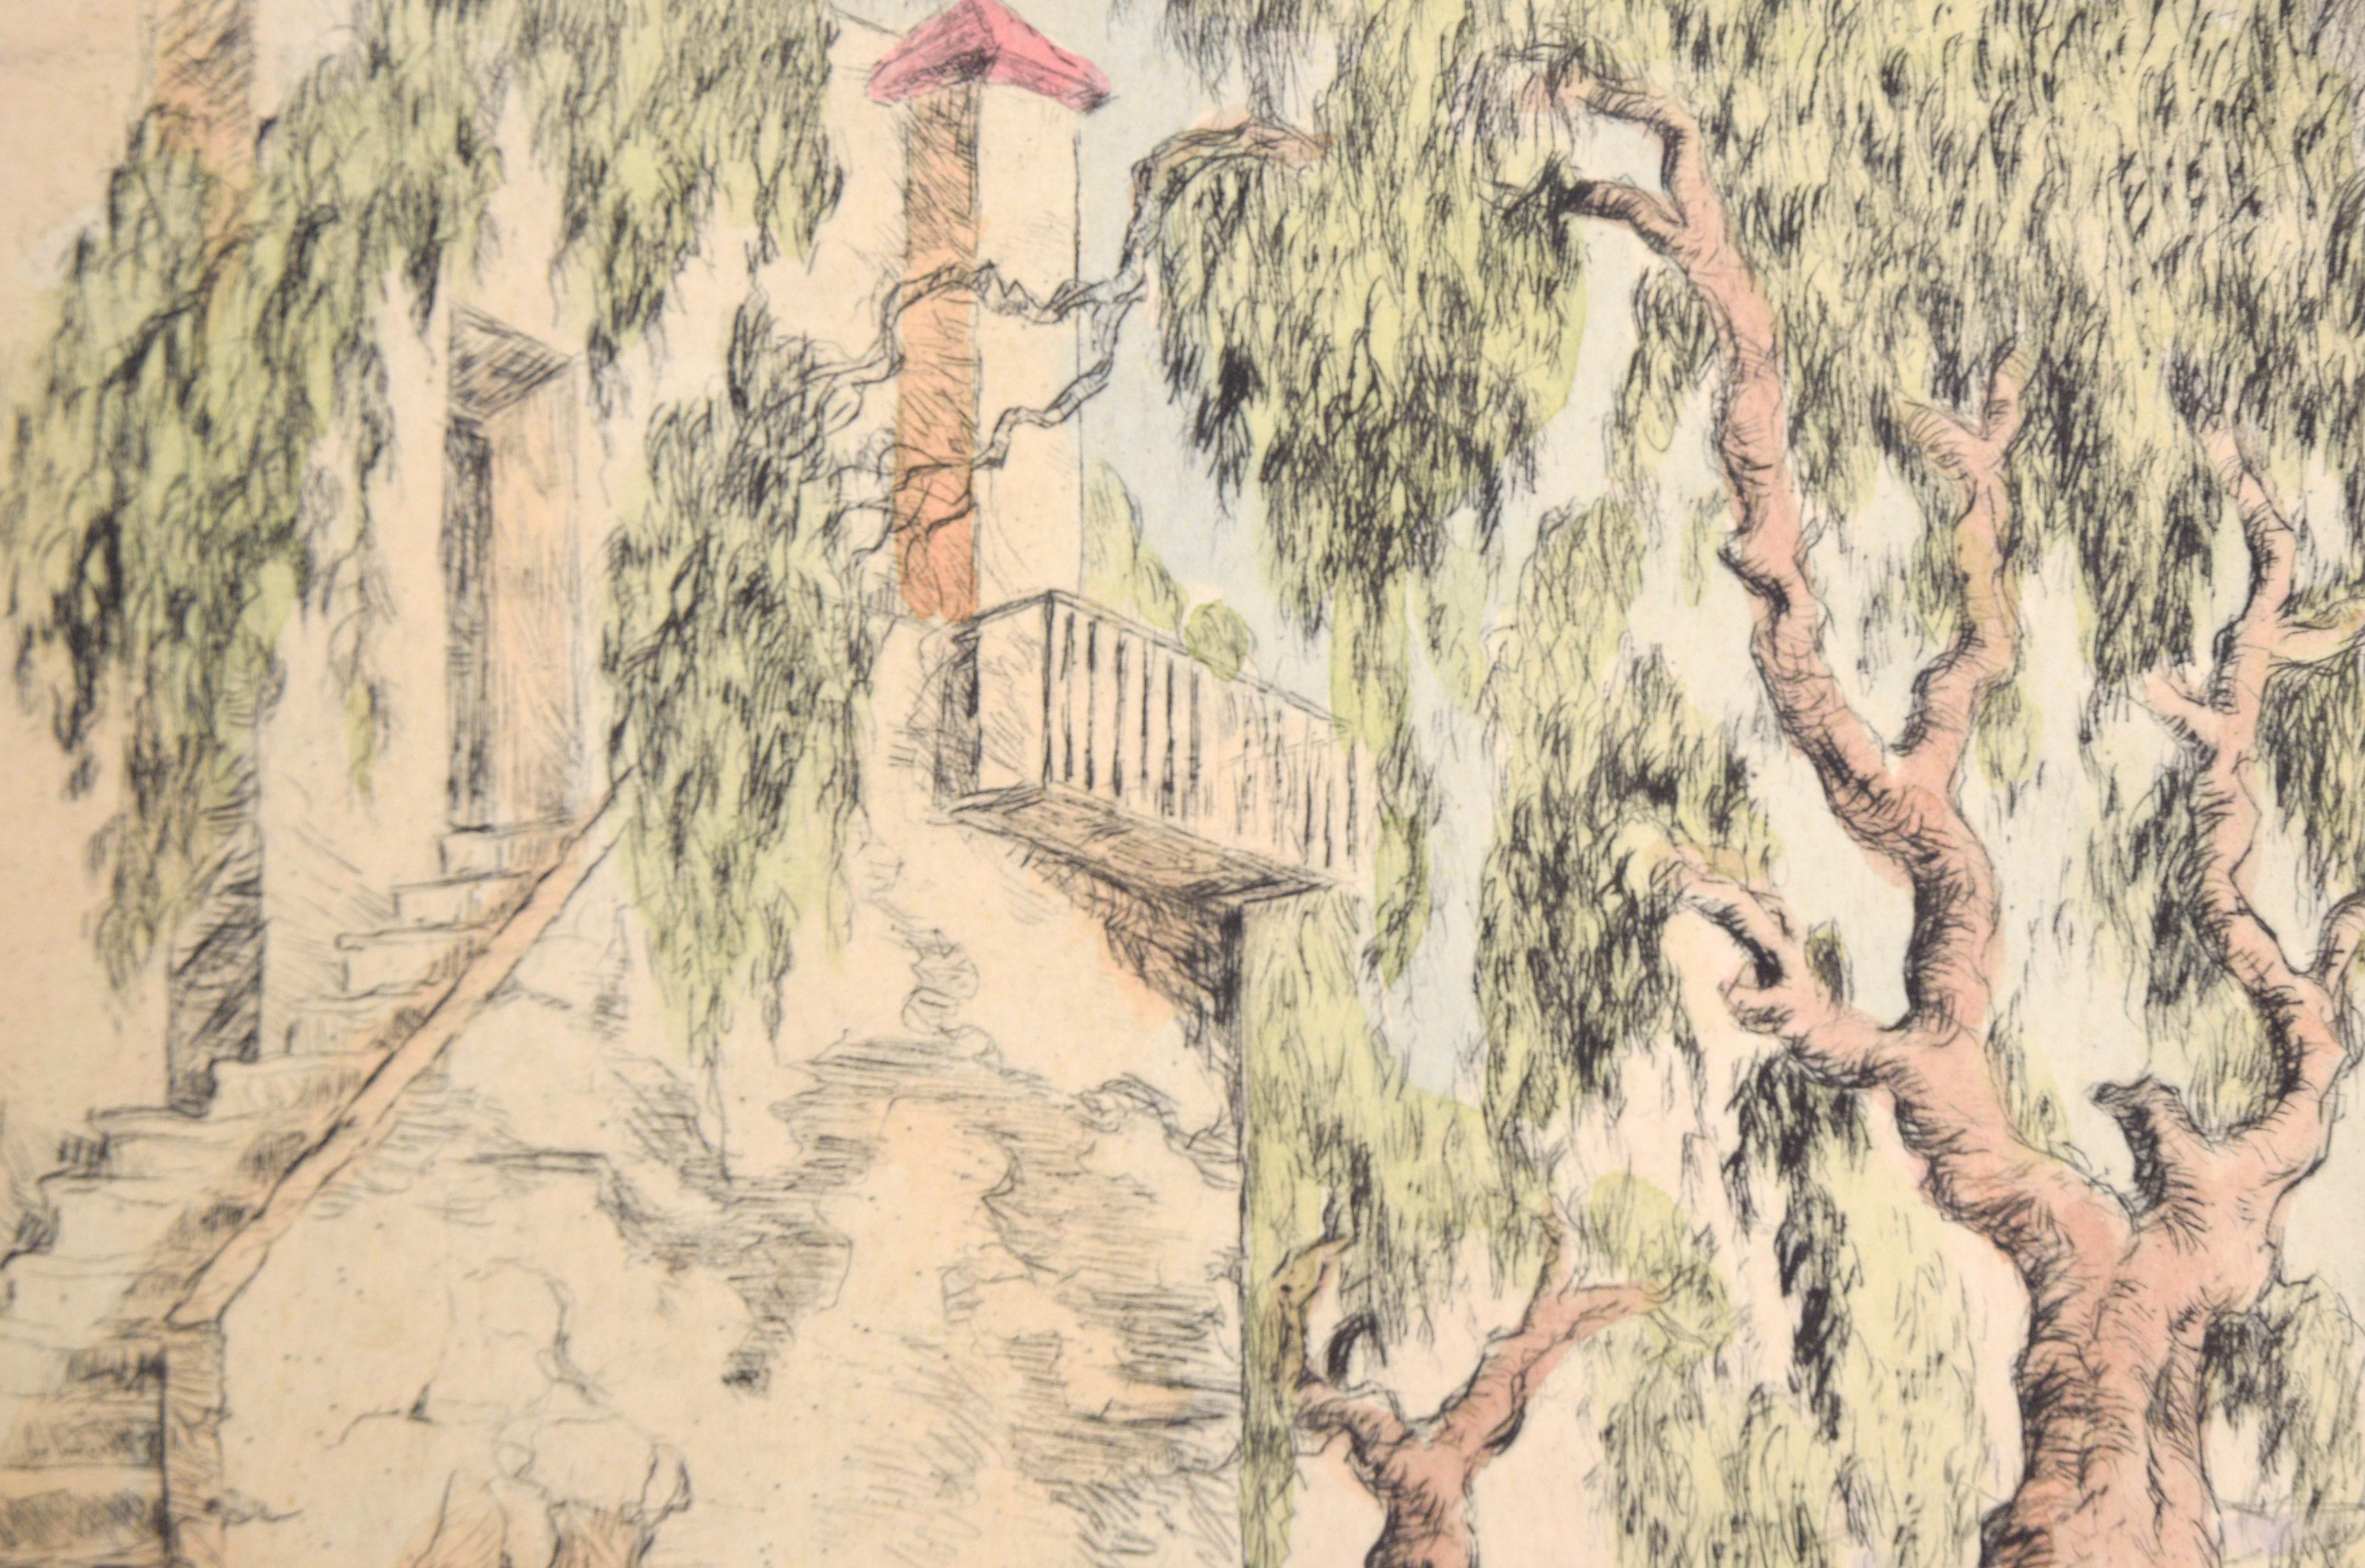 Corkscrew Willows with Stairs - Hand Colored Drypoint Etching California Adobe - Beige Landscape Art by Orpha Klinker